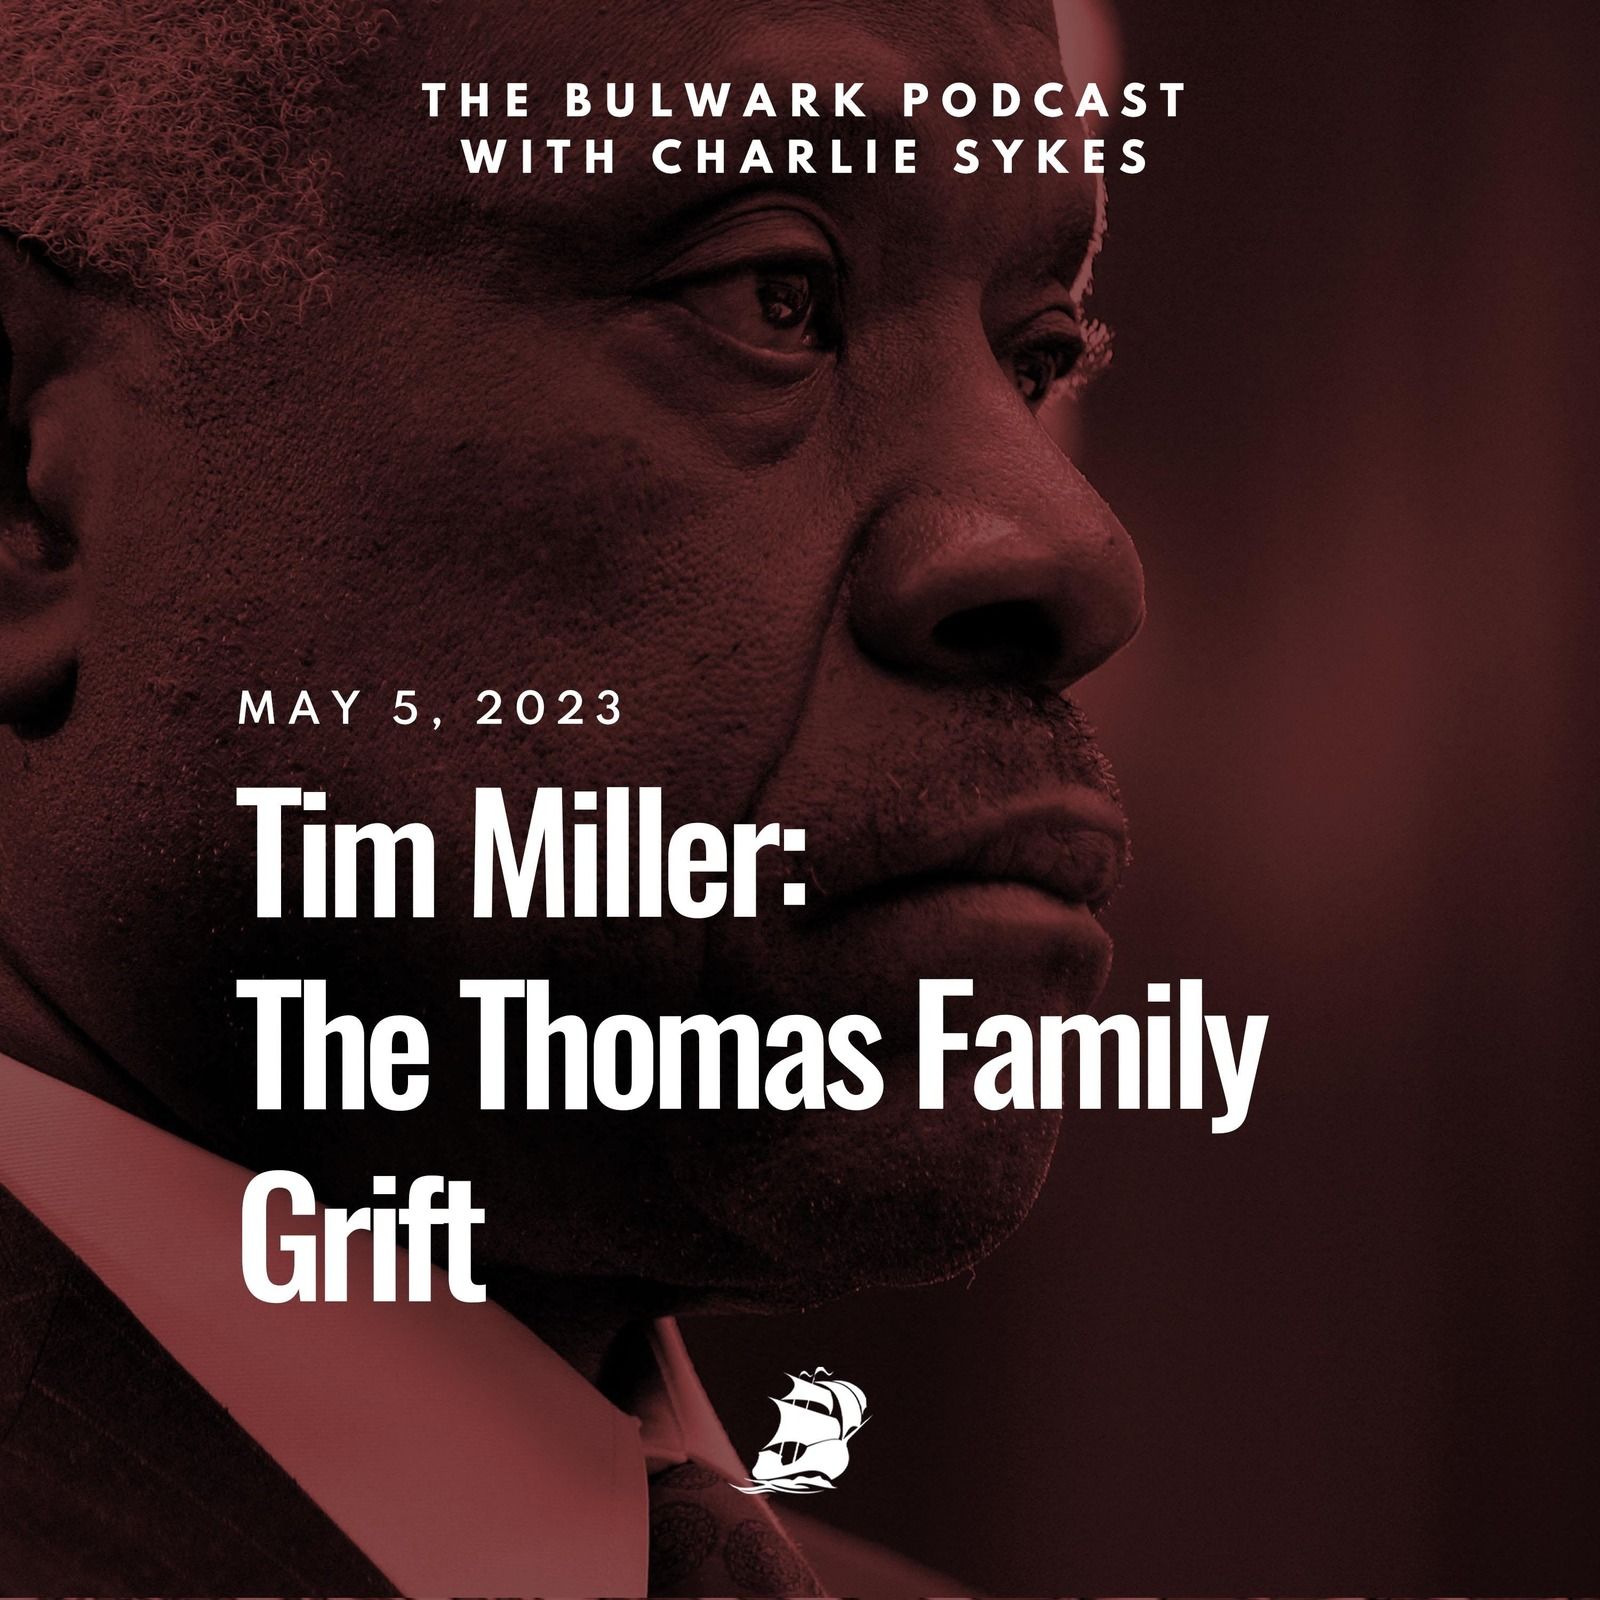 Tim Miller: The Thomas Family Grift by The Bulwark Podcast